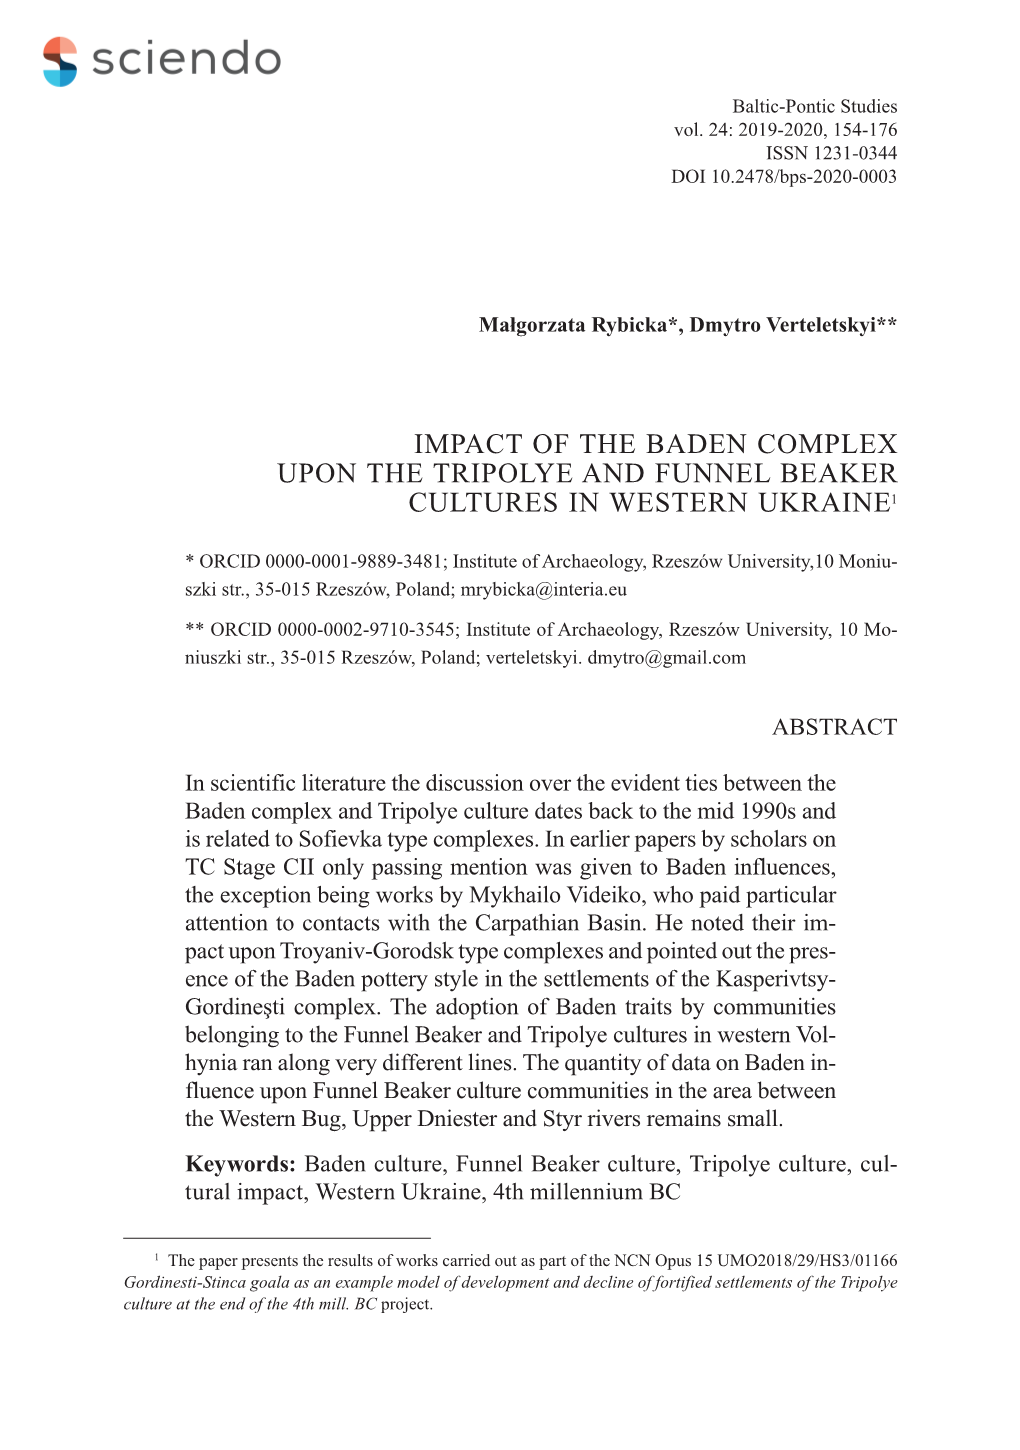 IMPACT of the BADEN COMPLEX UPON the TRIPOLYE and FUNNEL BEAKER CULTURES in WESTERN UKRAINE1